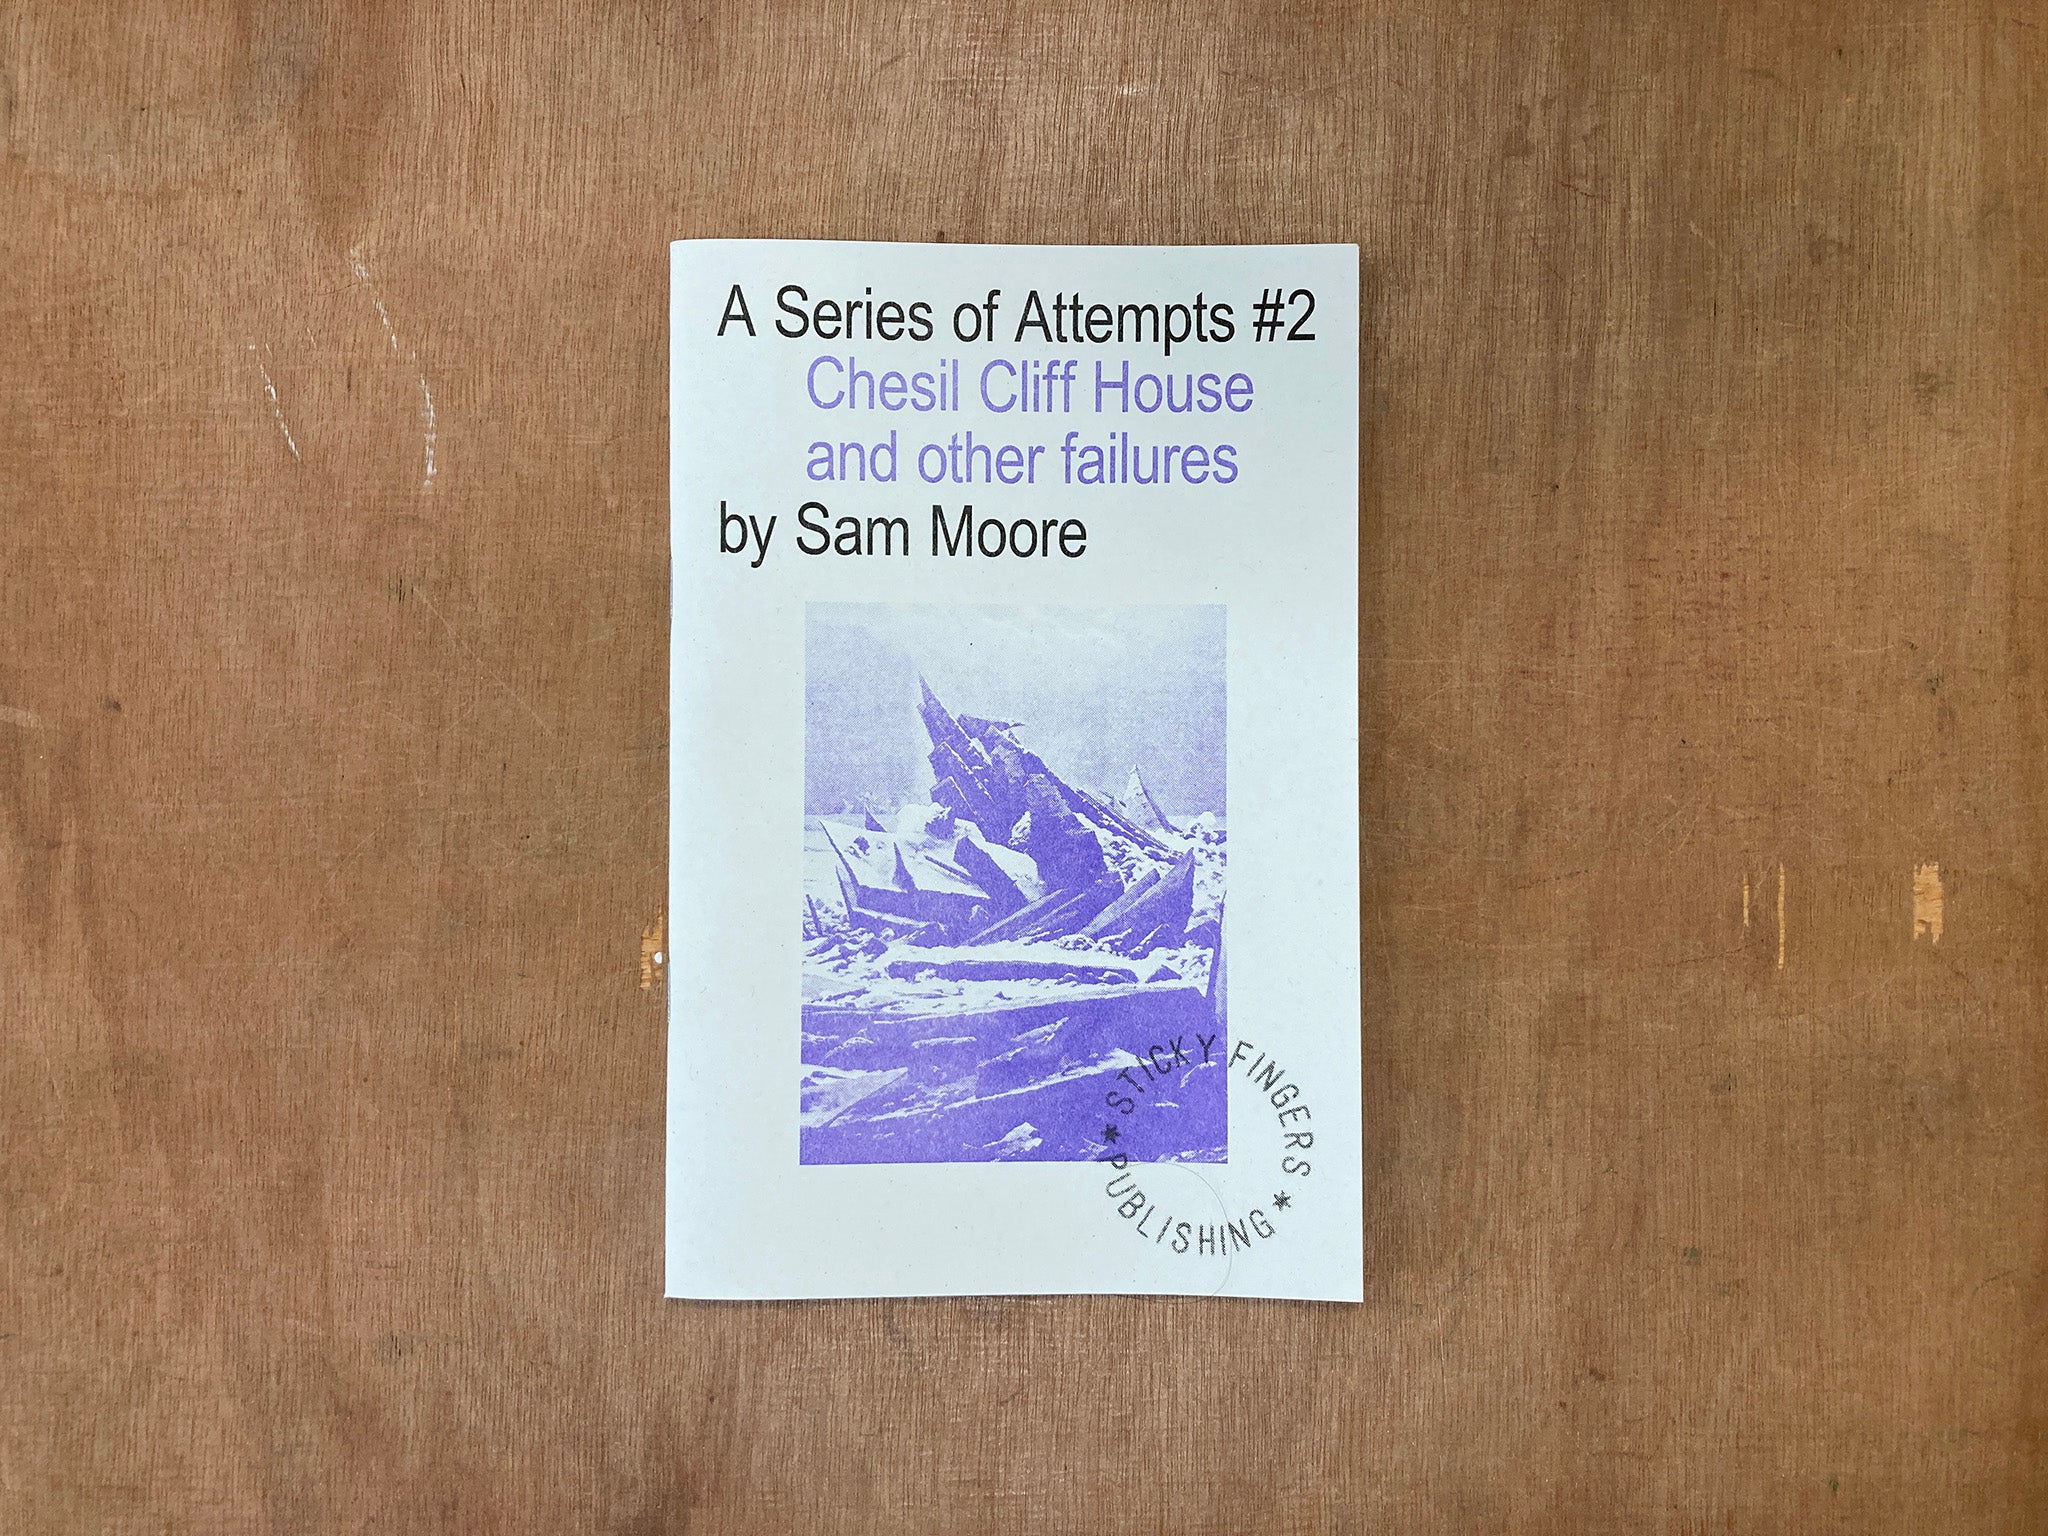 CHESIL CLIFF HOUSE AND OTHER FAILURES by Sam Moore